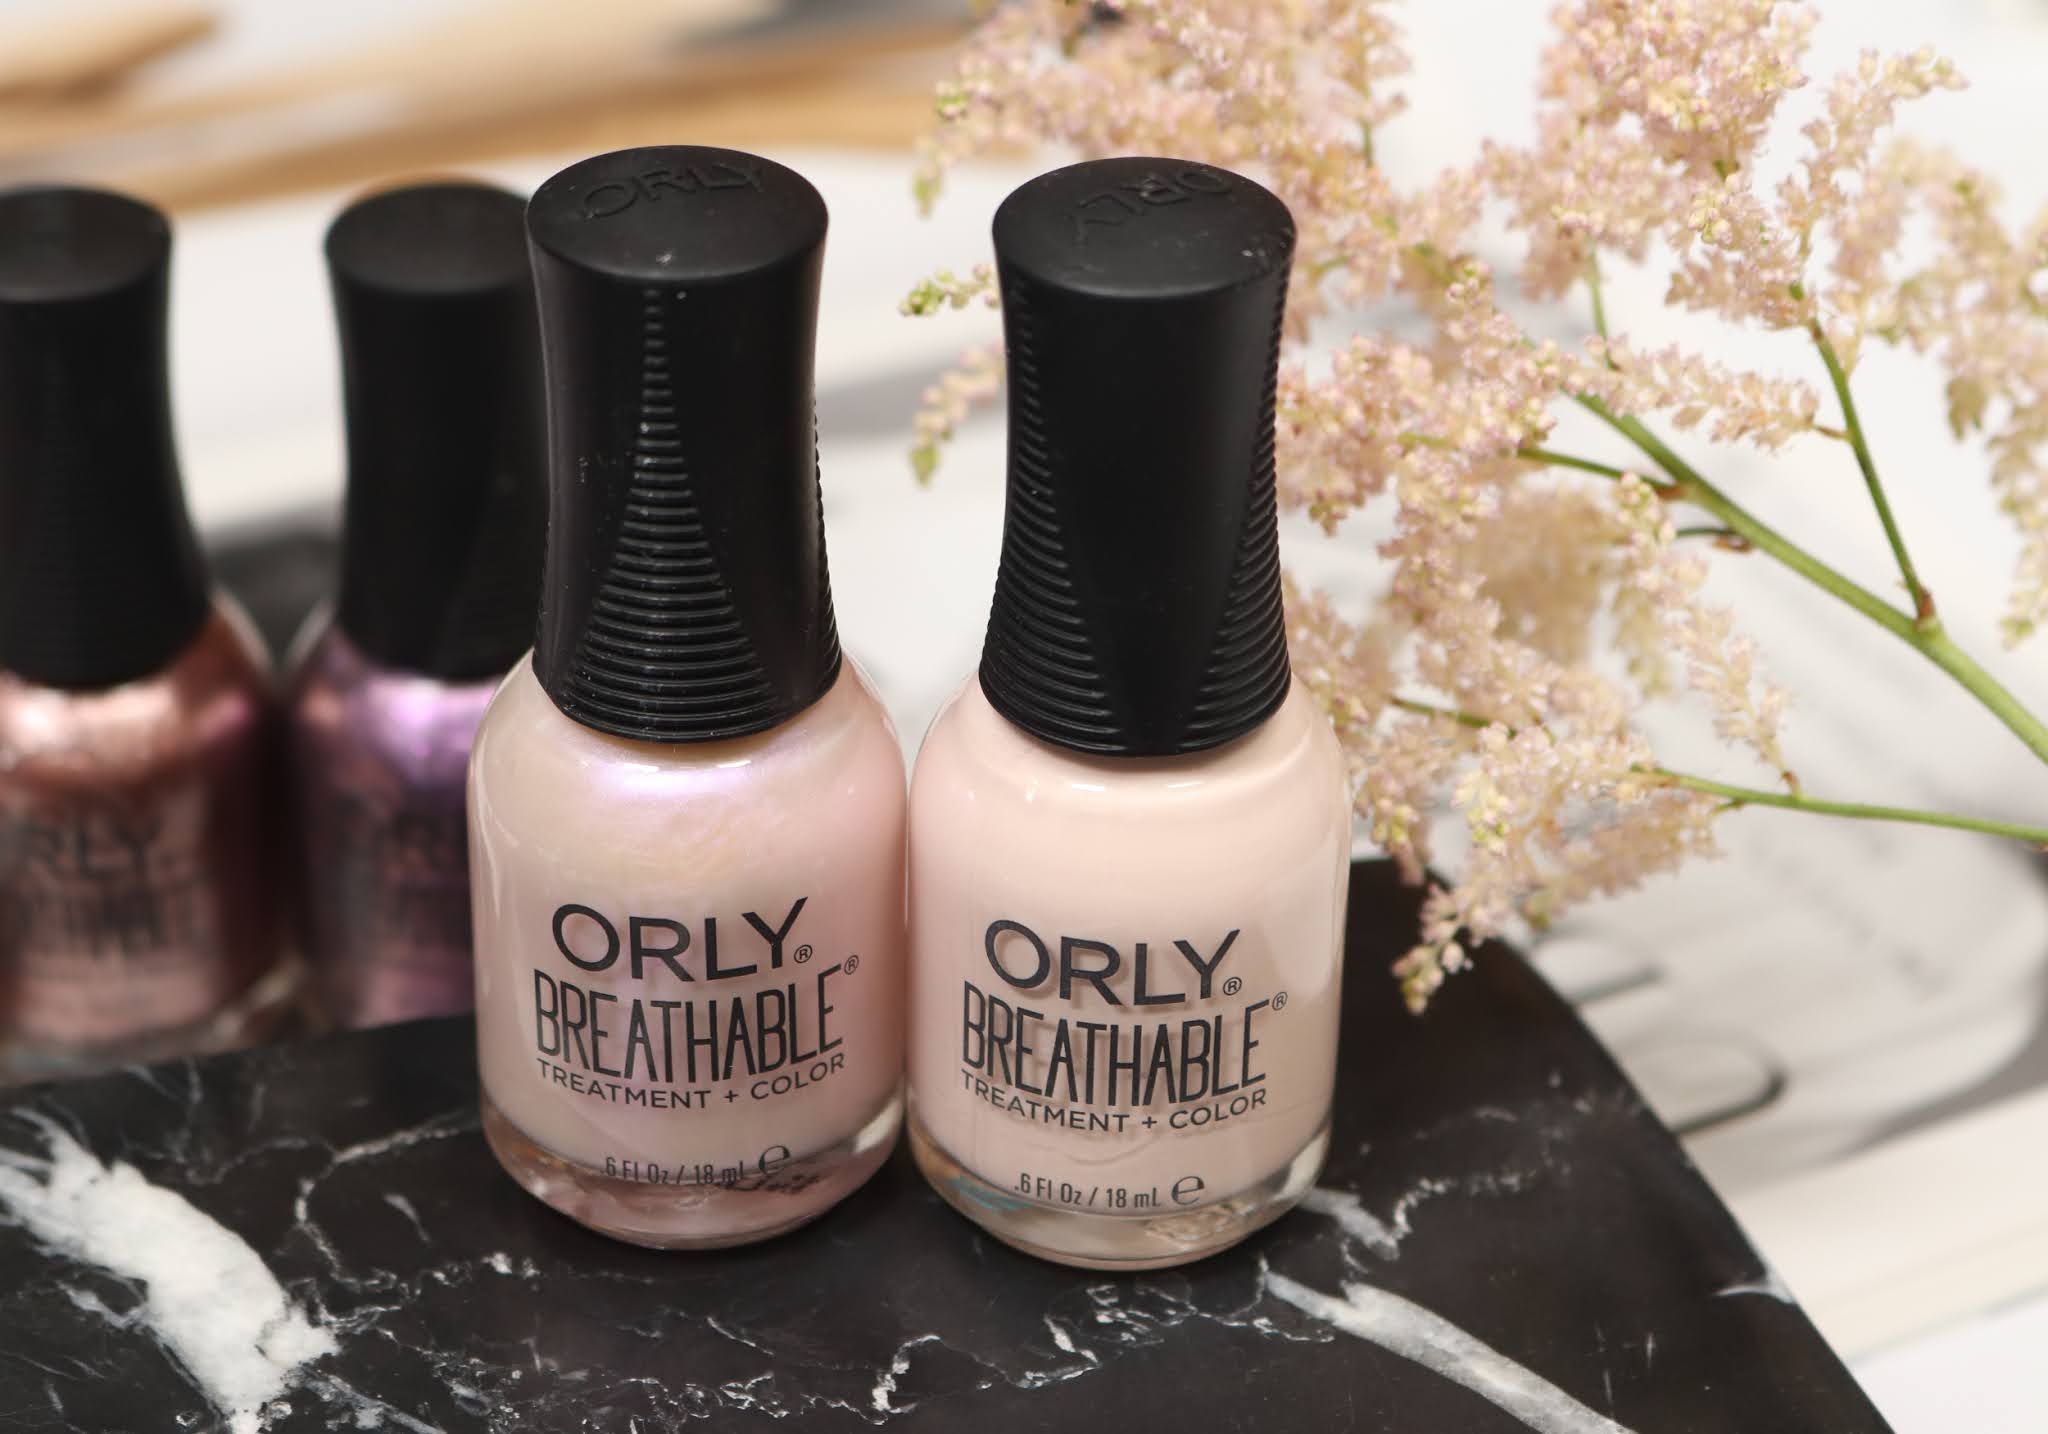 10. Orly Breathable Treatment + Color Nail Polish in "A Touch of Color" - wide 5